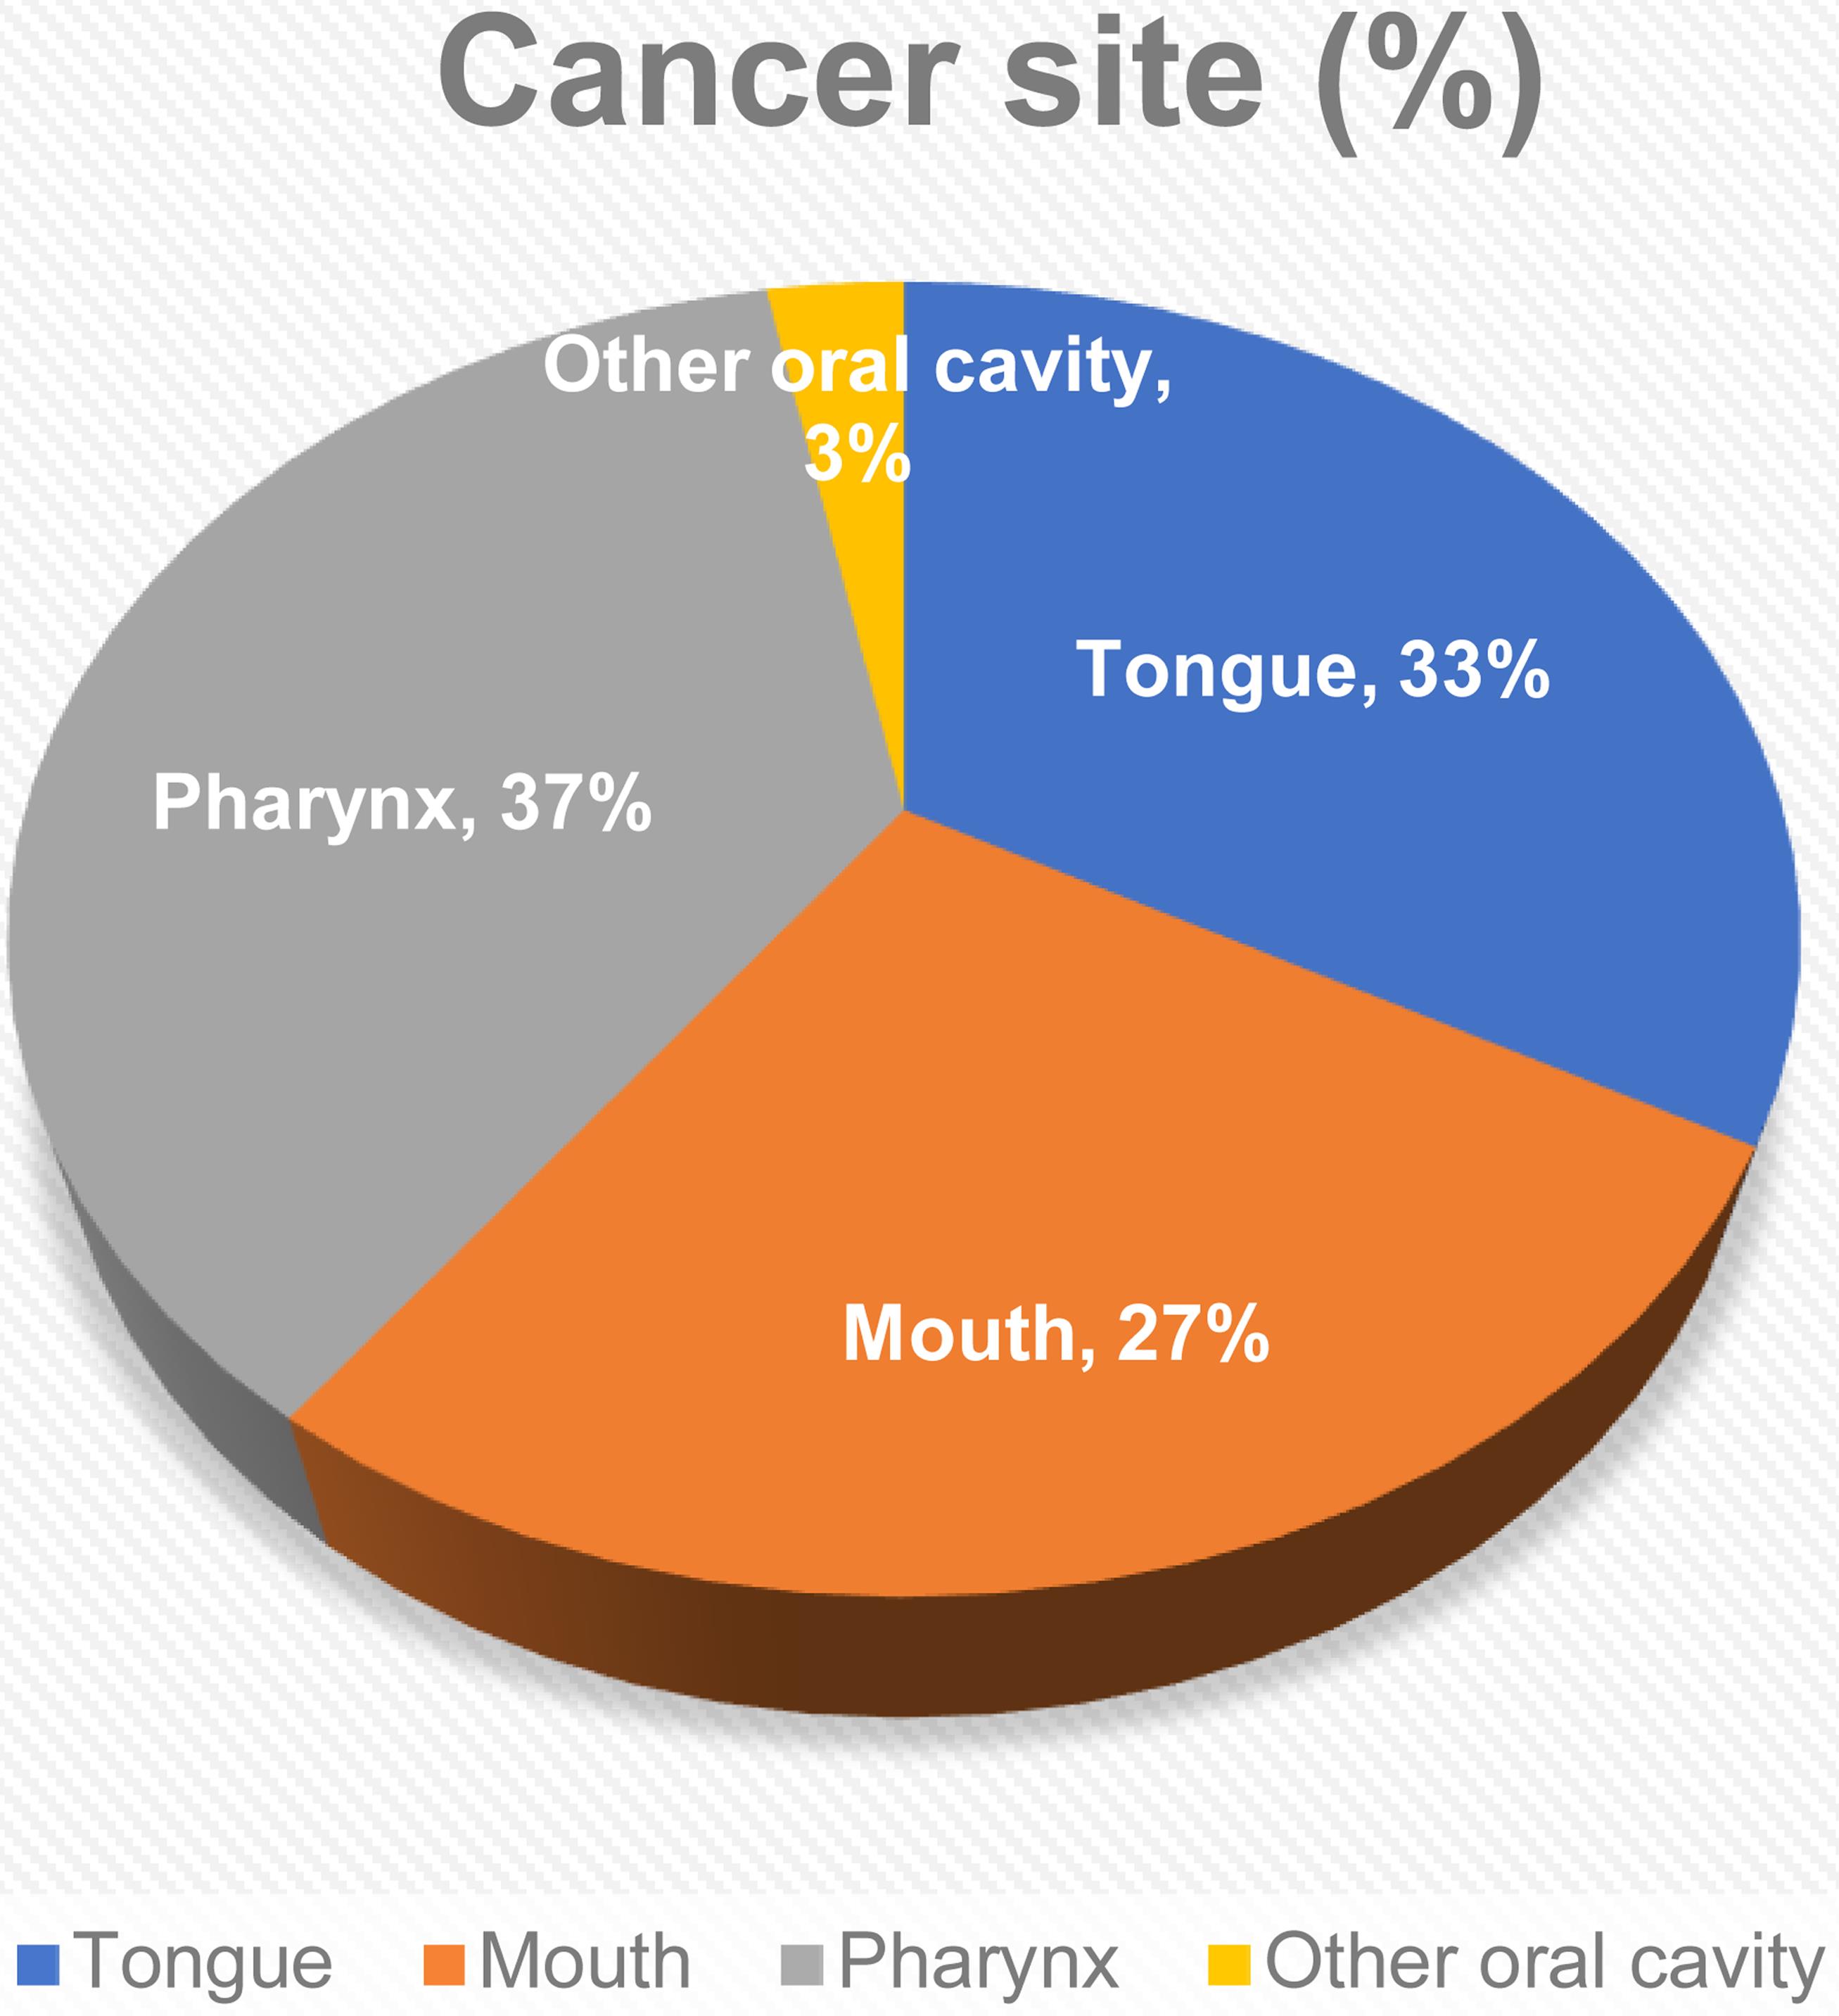 Location-wise distribution of estimated oral cancer cases in 2023.